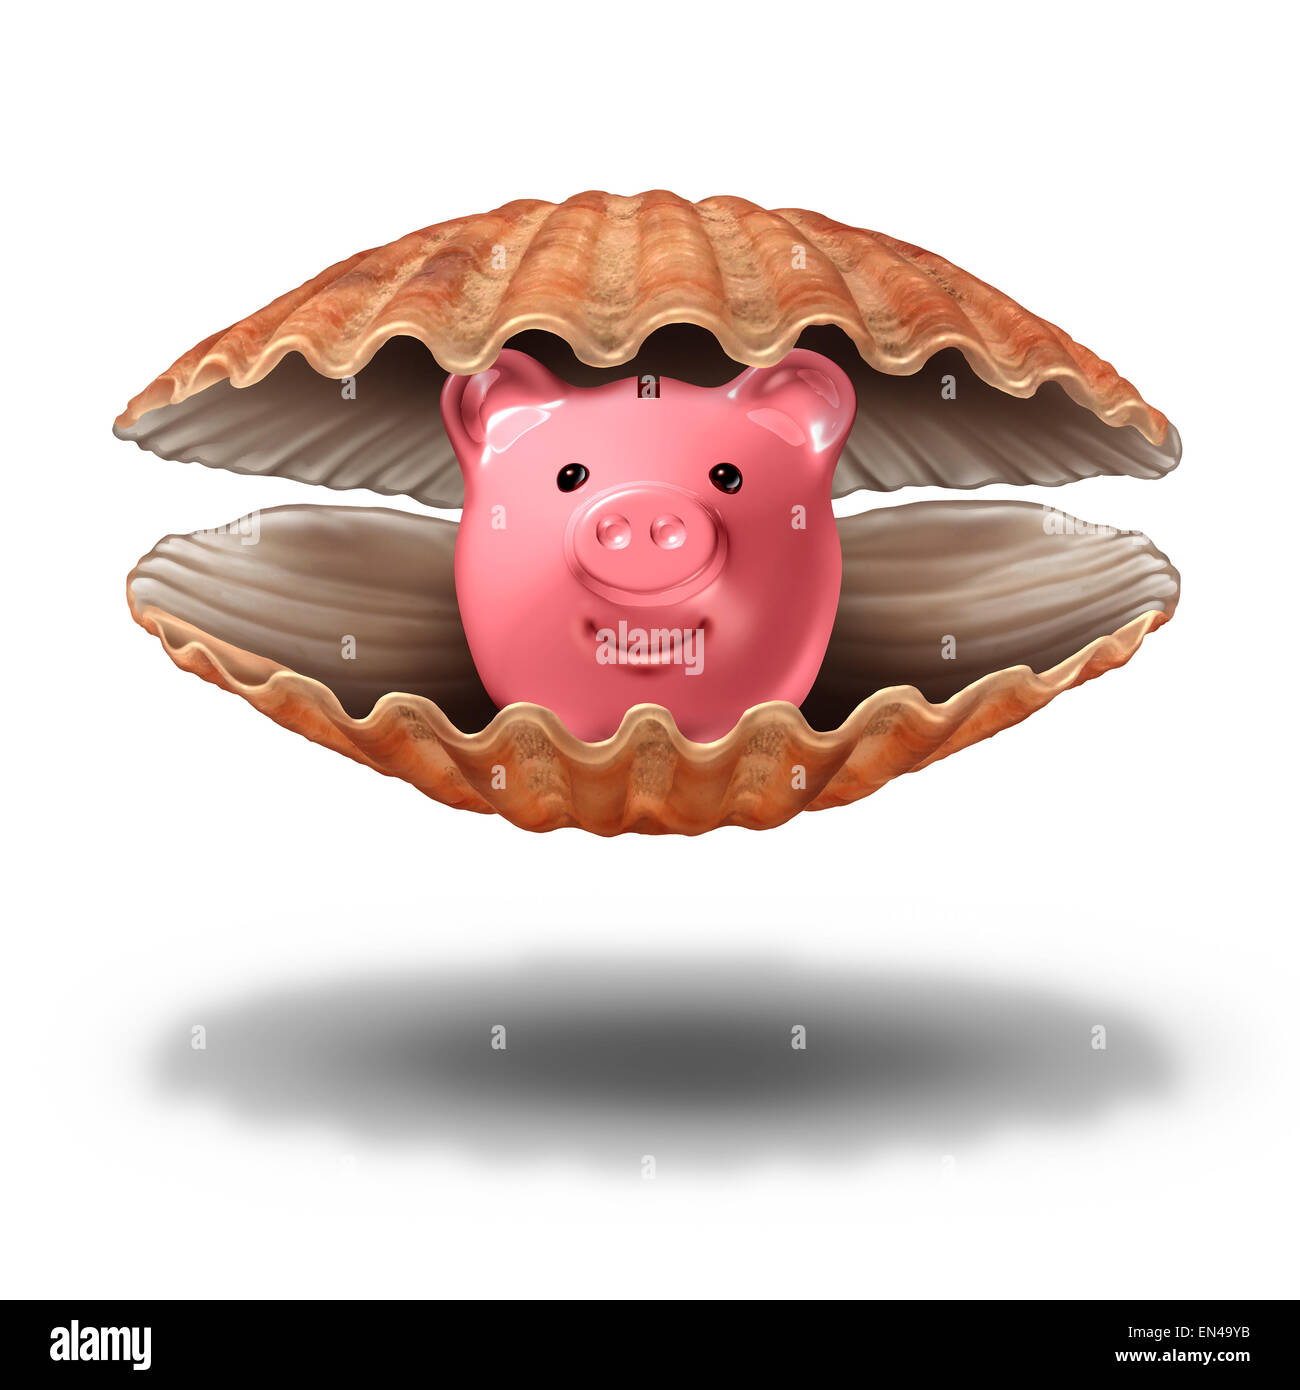 Savings treasure and financial wealth fortune concept as an open sea shell with a piggy bank as a precious pearl icon for the symbol of tax shelter or prized investment idea. Stock Photo